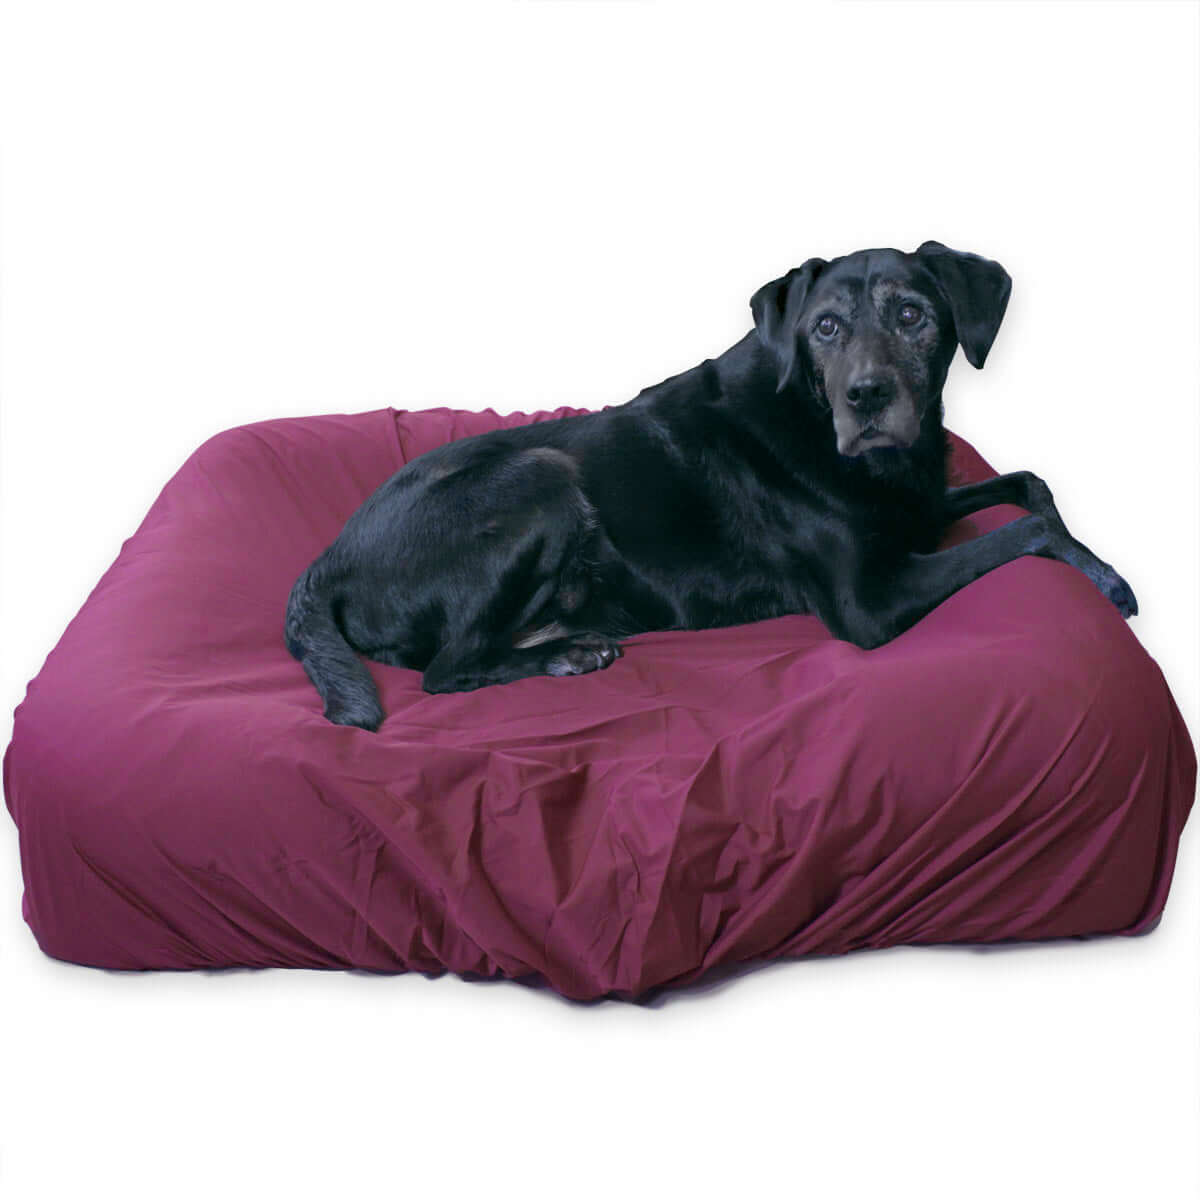 Slim PawSheets® for Low Profile Beds